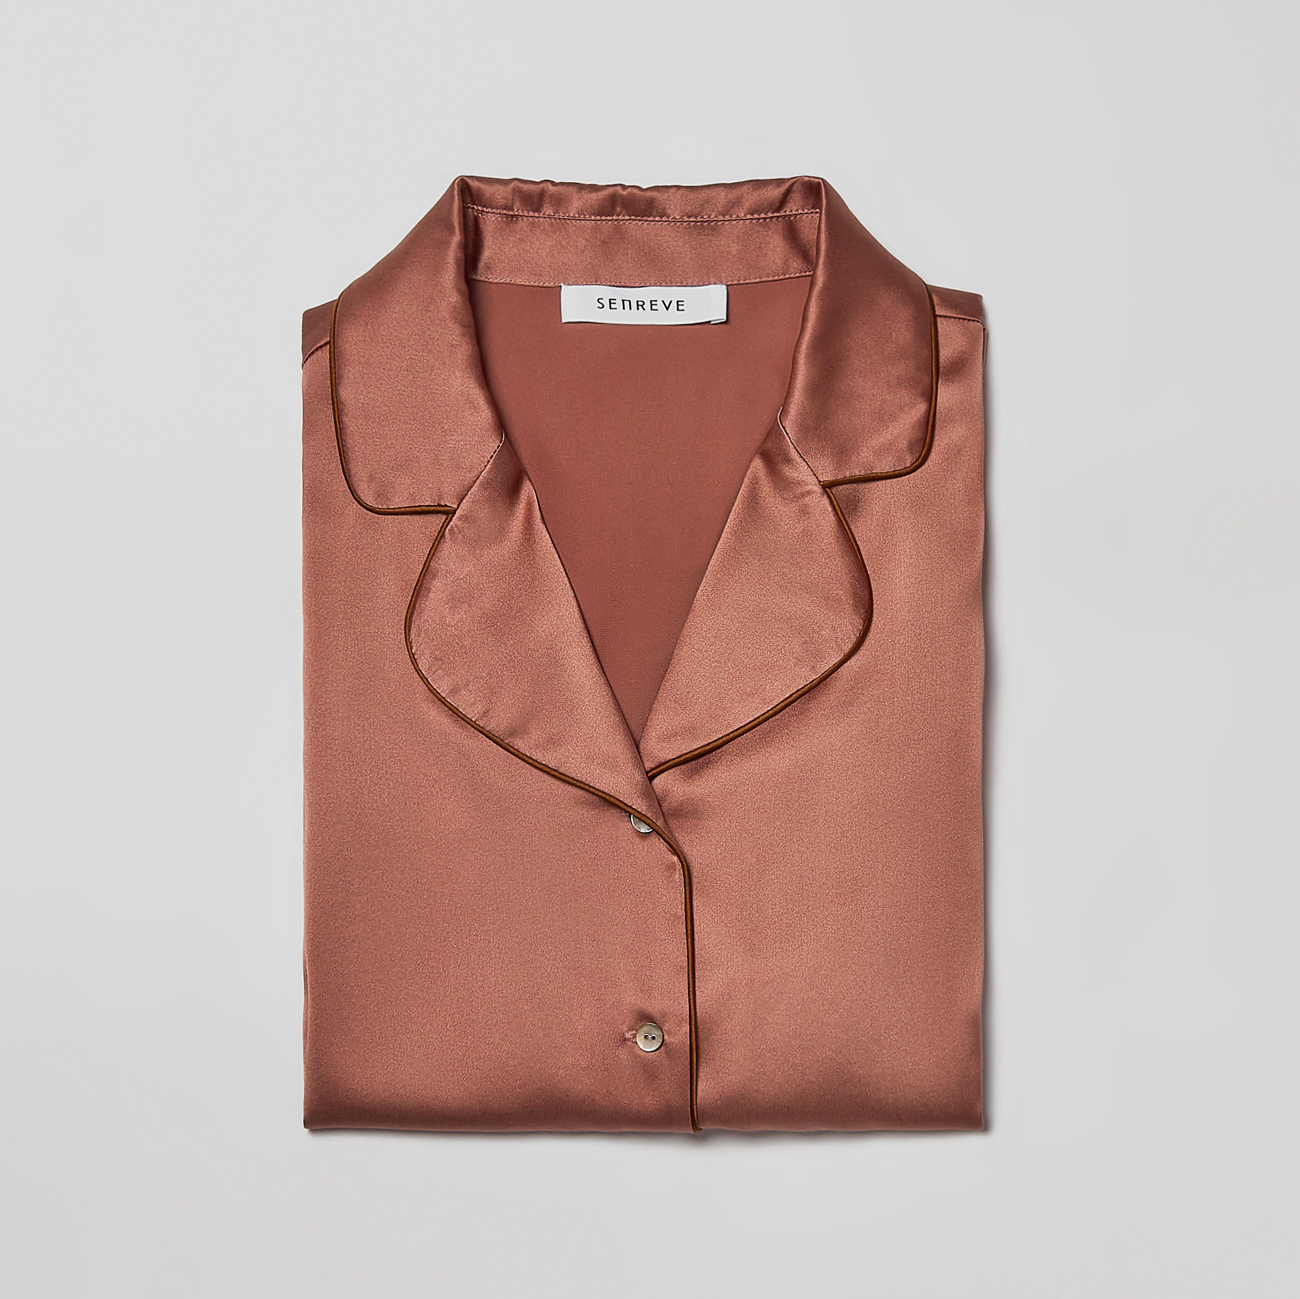 Lumi silk shirt in ash rose folded front view.